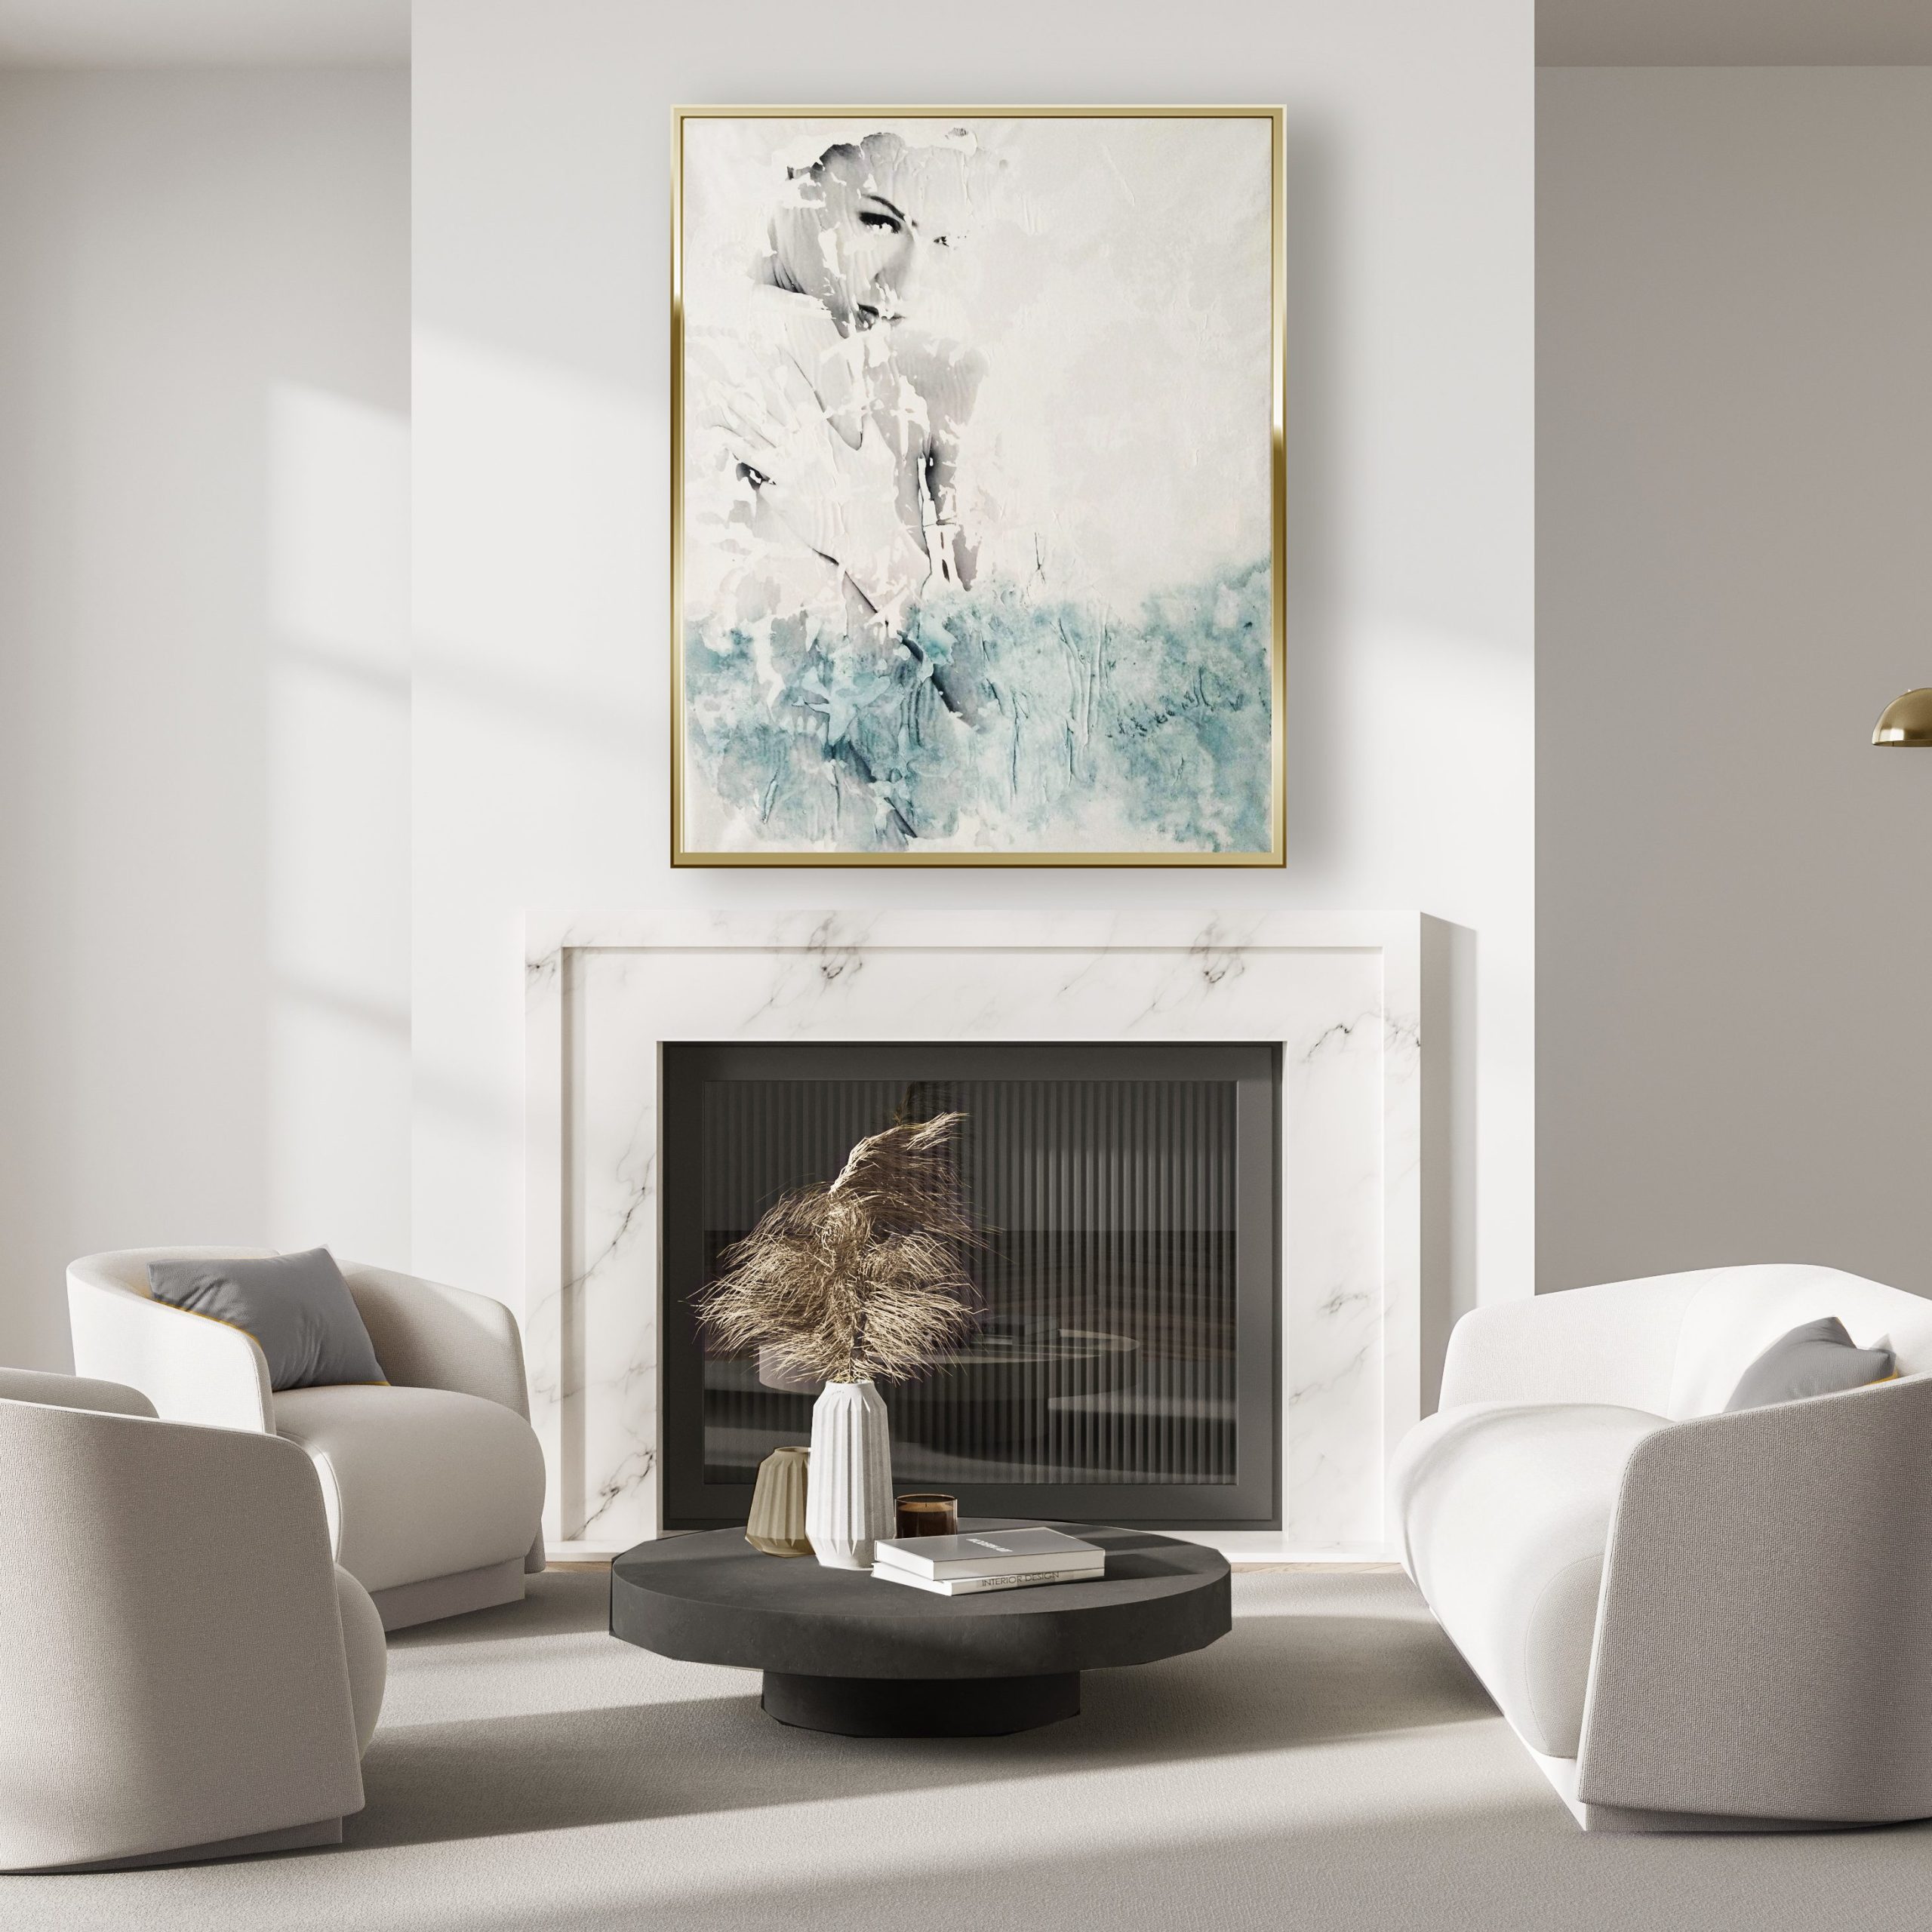 "Nuevo III" figurative painting in Light living room interior with fireplace, two armchairs and sofa, coffee table and lamp on parquet floor with carpet. Mockup blank frame in resting guest room, 3D rendering